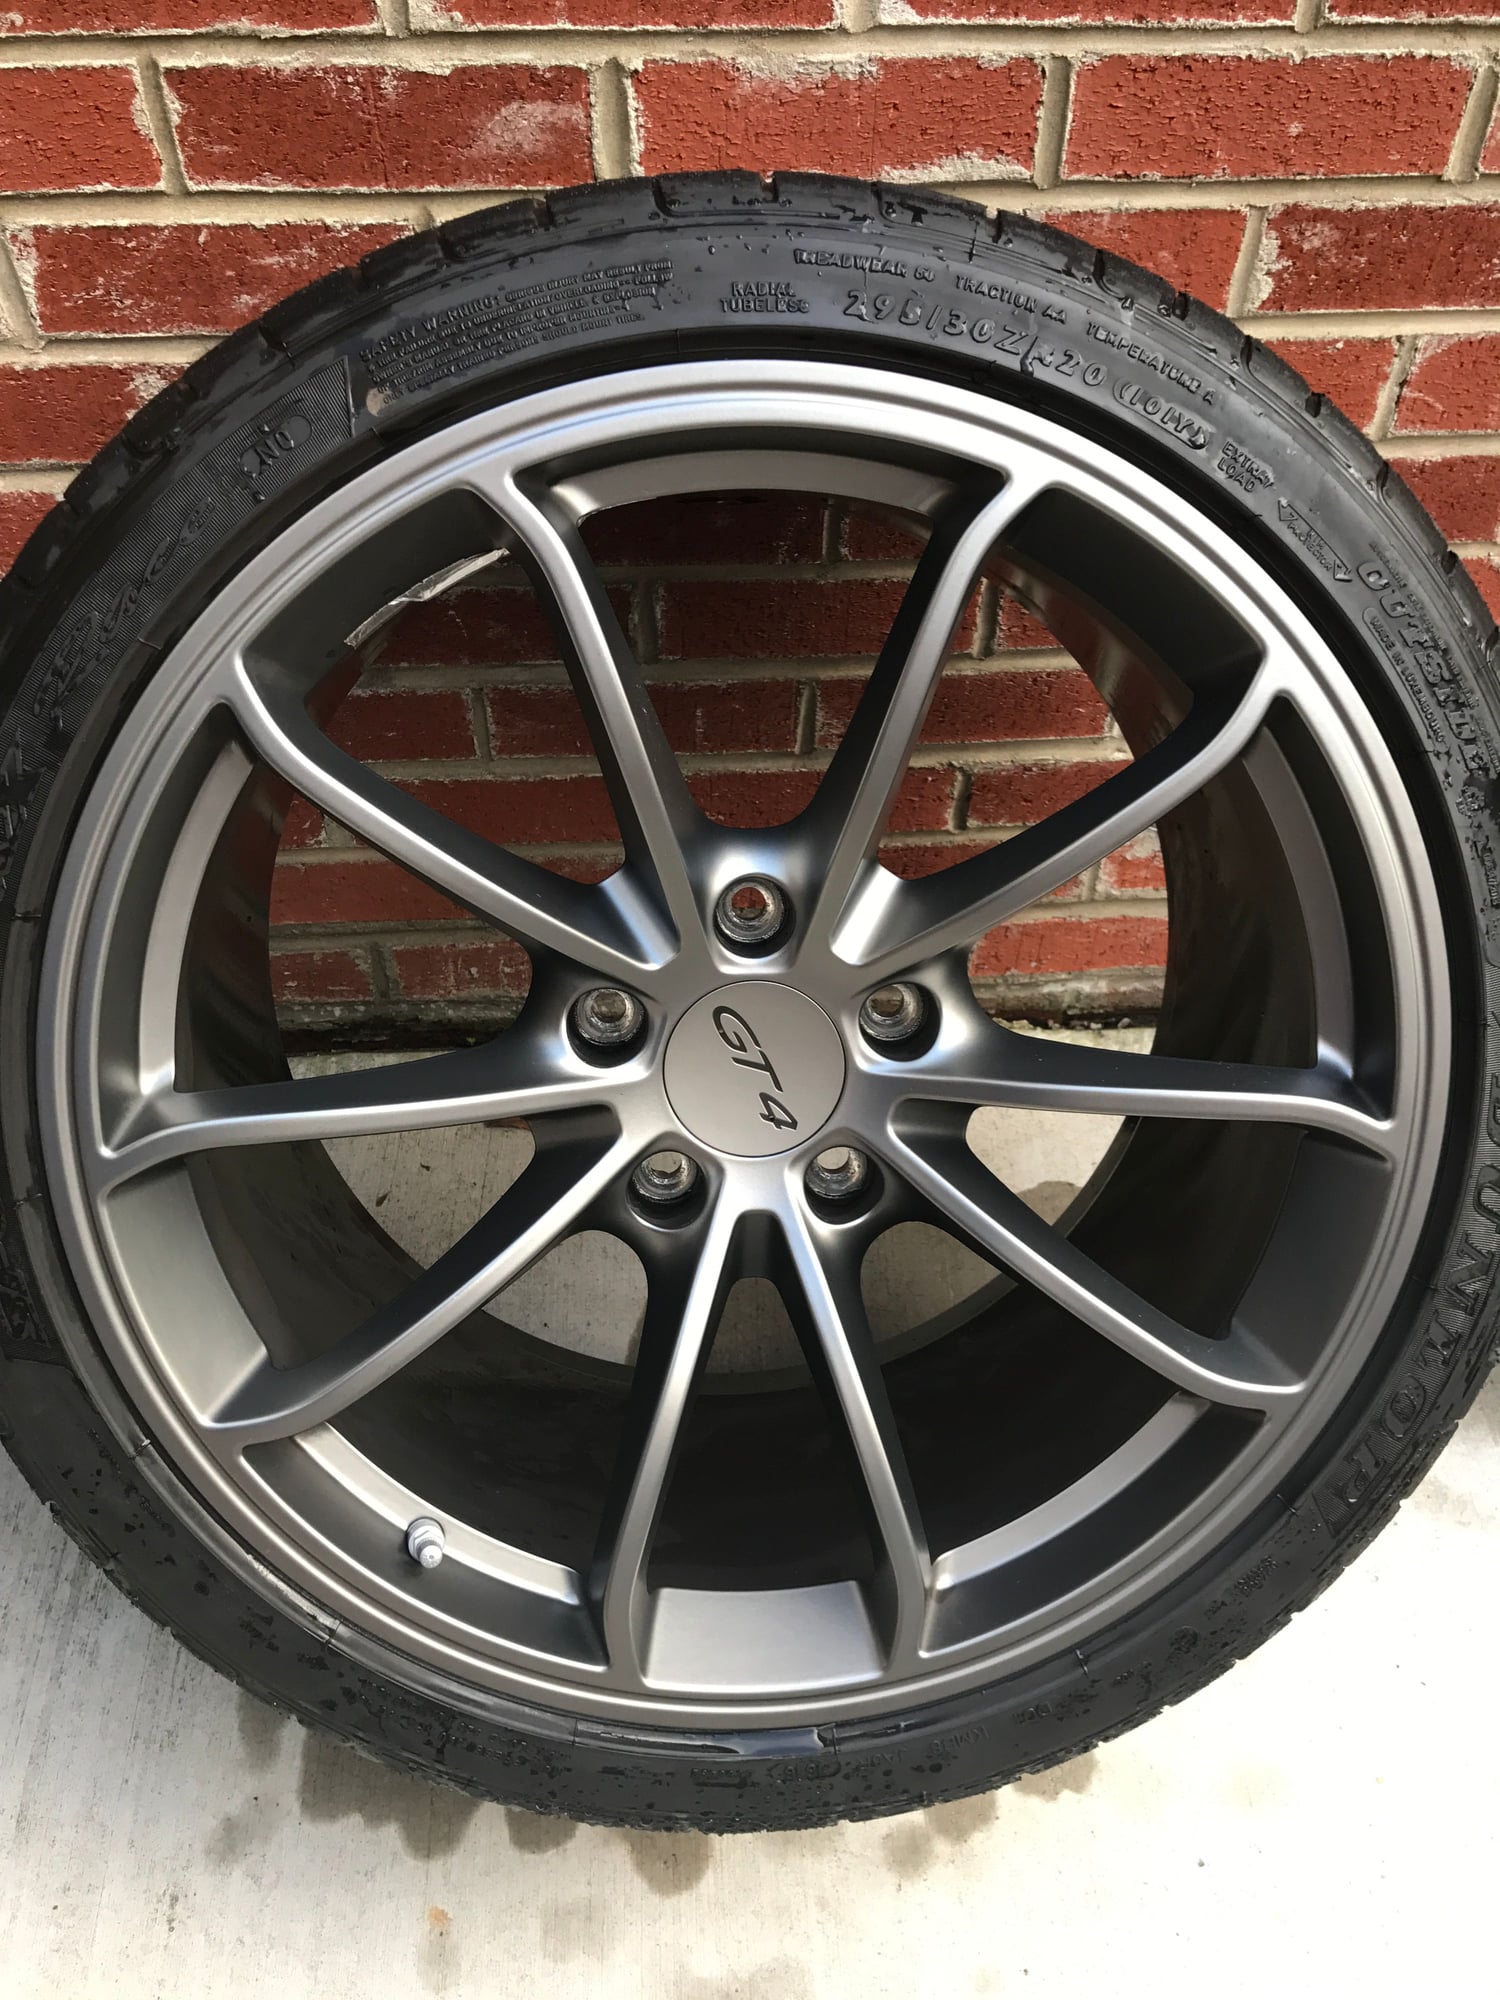 Wheels and Tires/Axles - OEM GT4 Wheels and Tires Platinum - Used - 2016 Porsche Cayman GT4 - Washington, DC 20007, United States